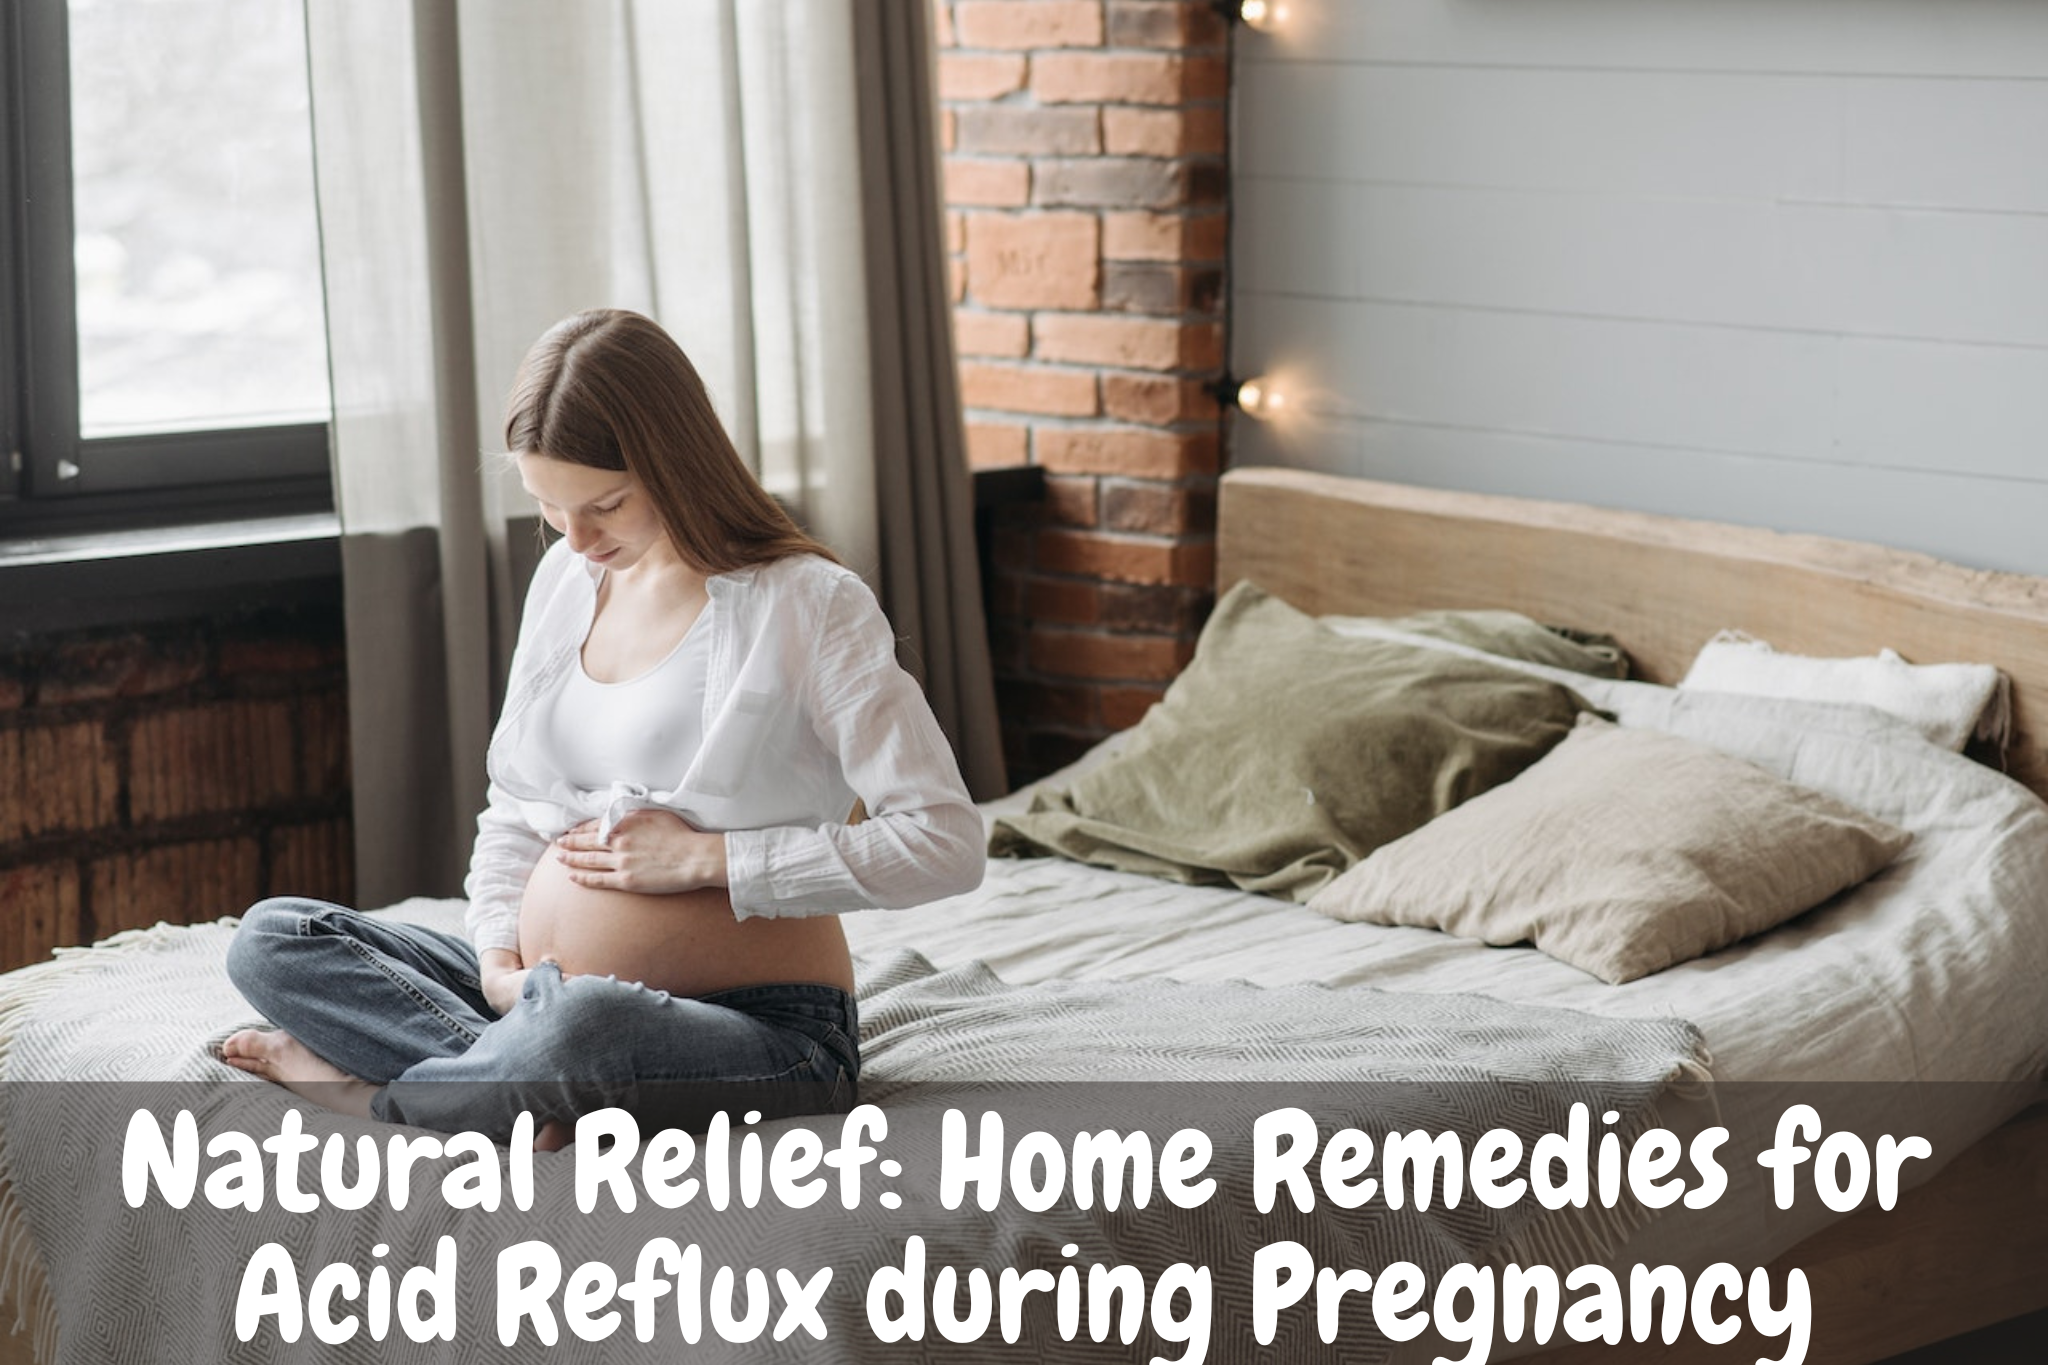 Natural Relief: Home Remedies for Acid Reflux during Pregnancy